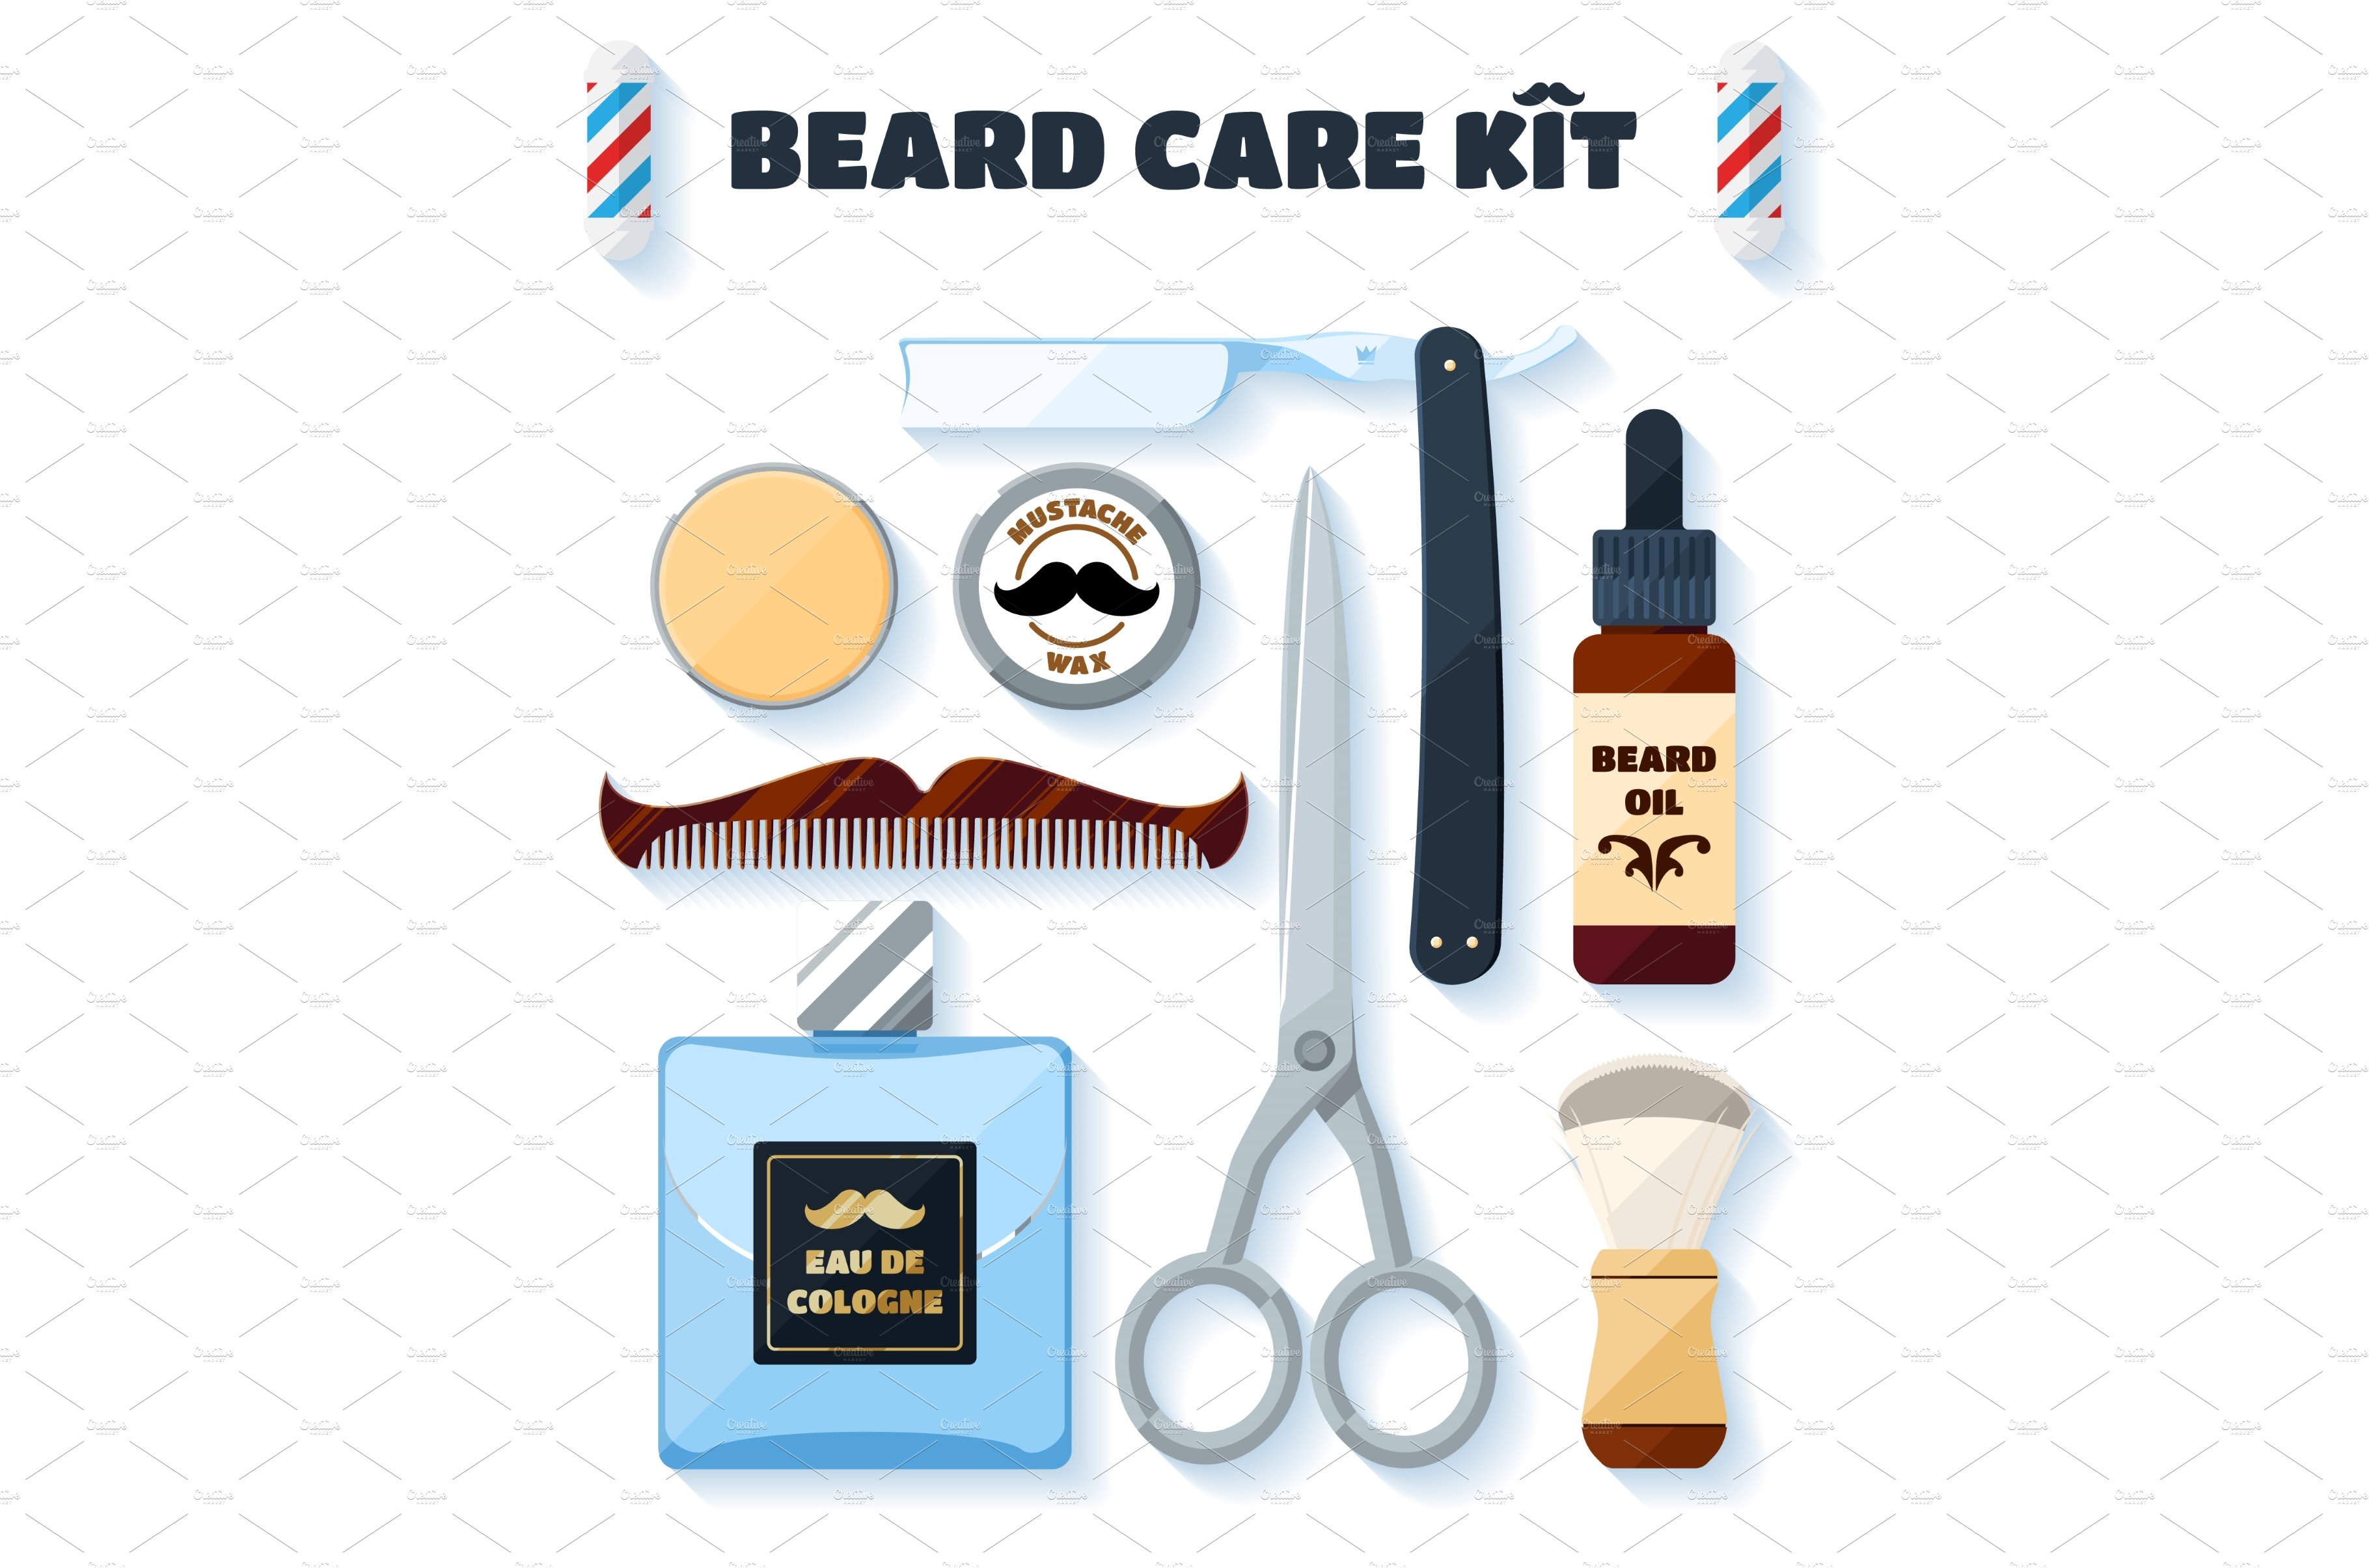 Shaving tools and accessories cover image.